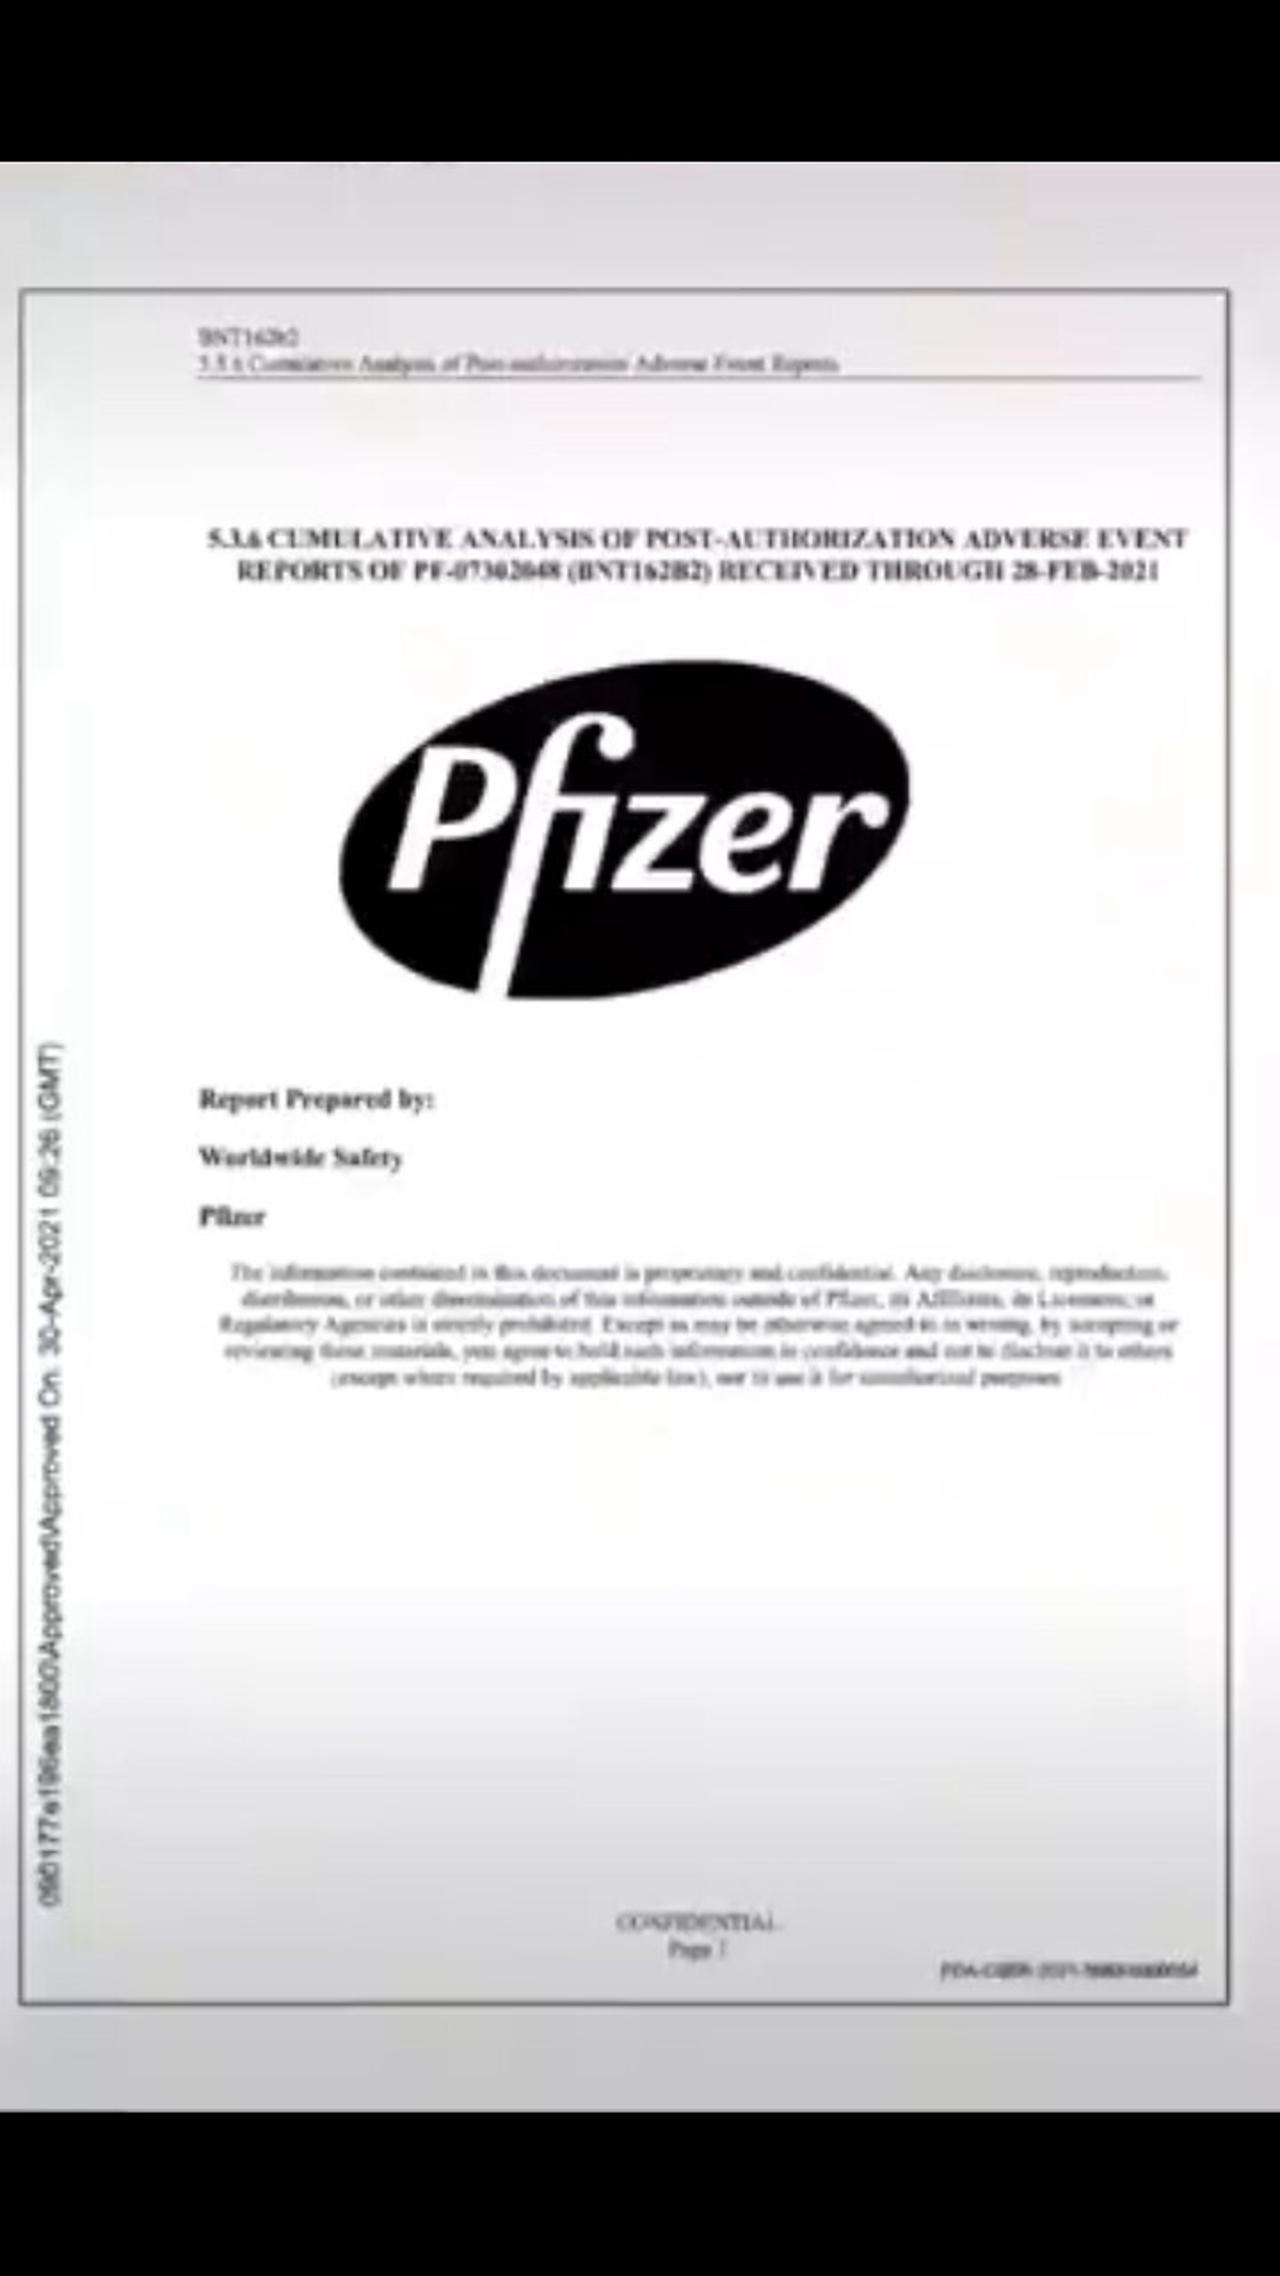 Many many side effects of the vaccine presented by Pfizer